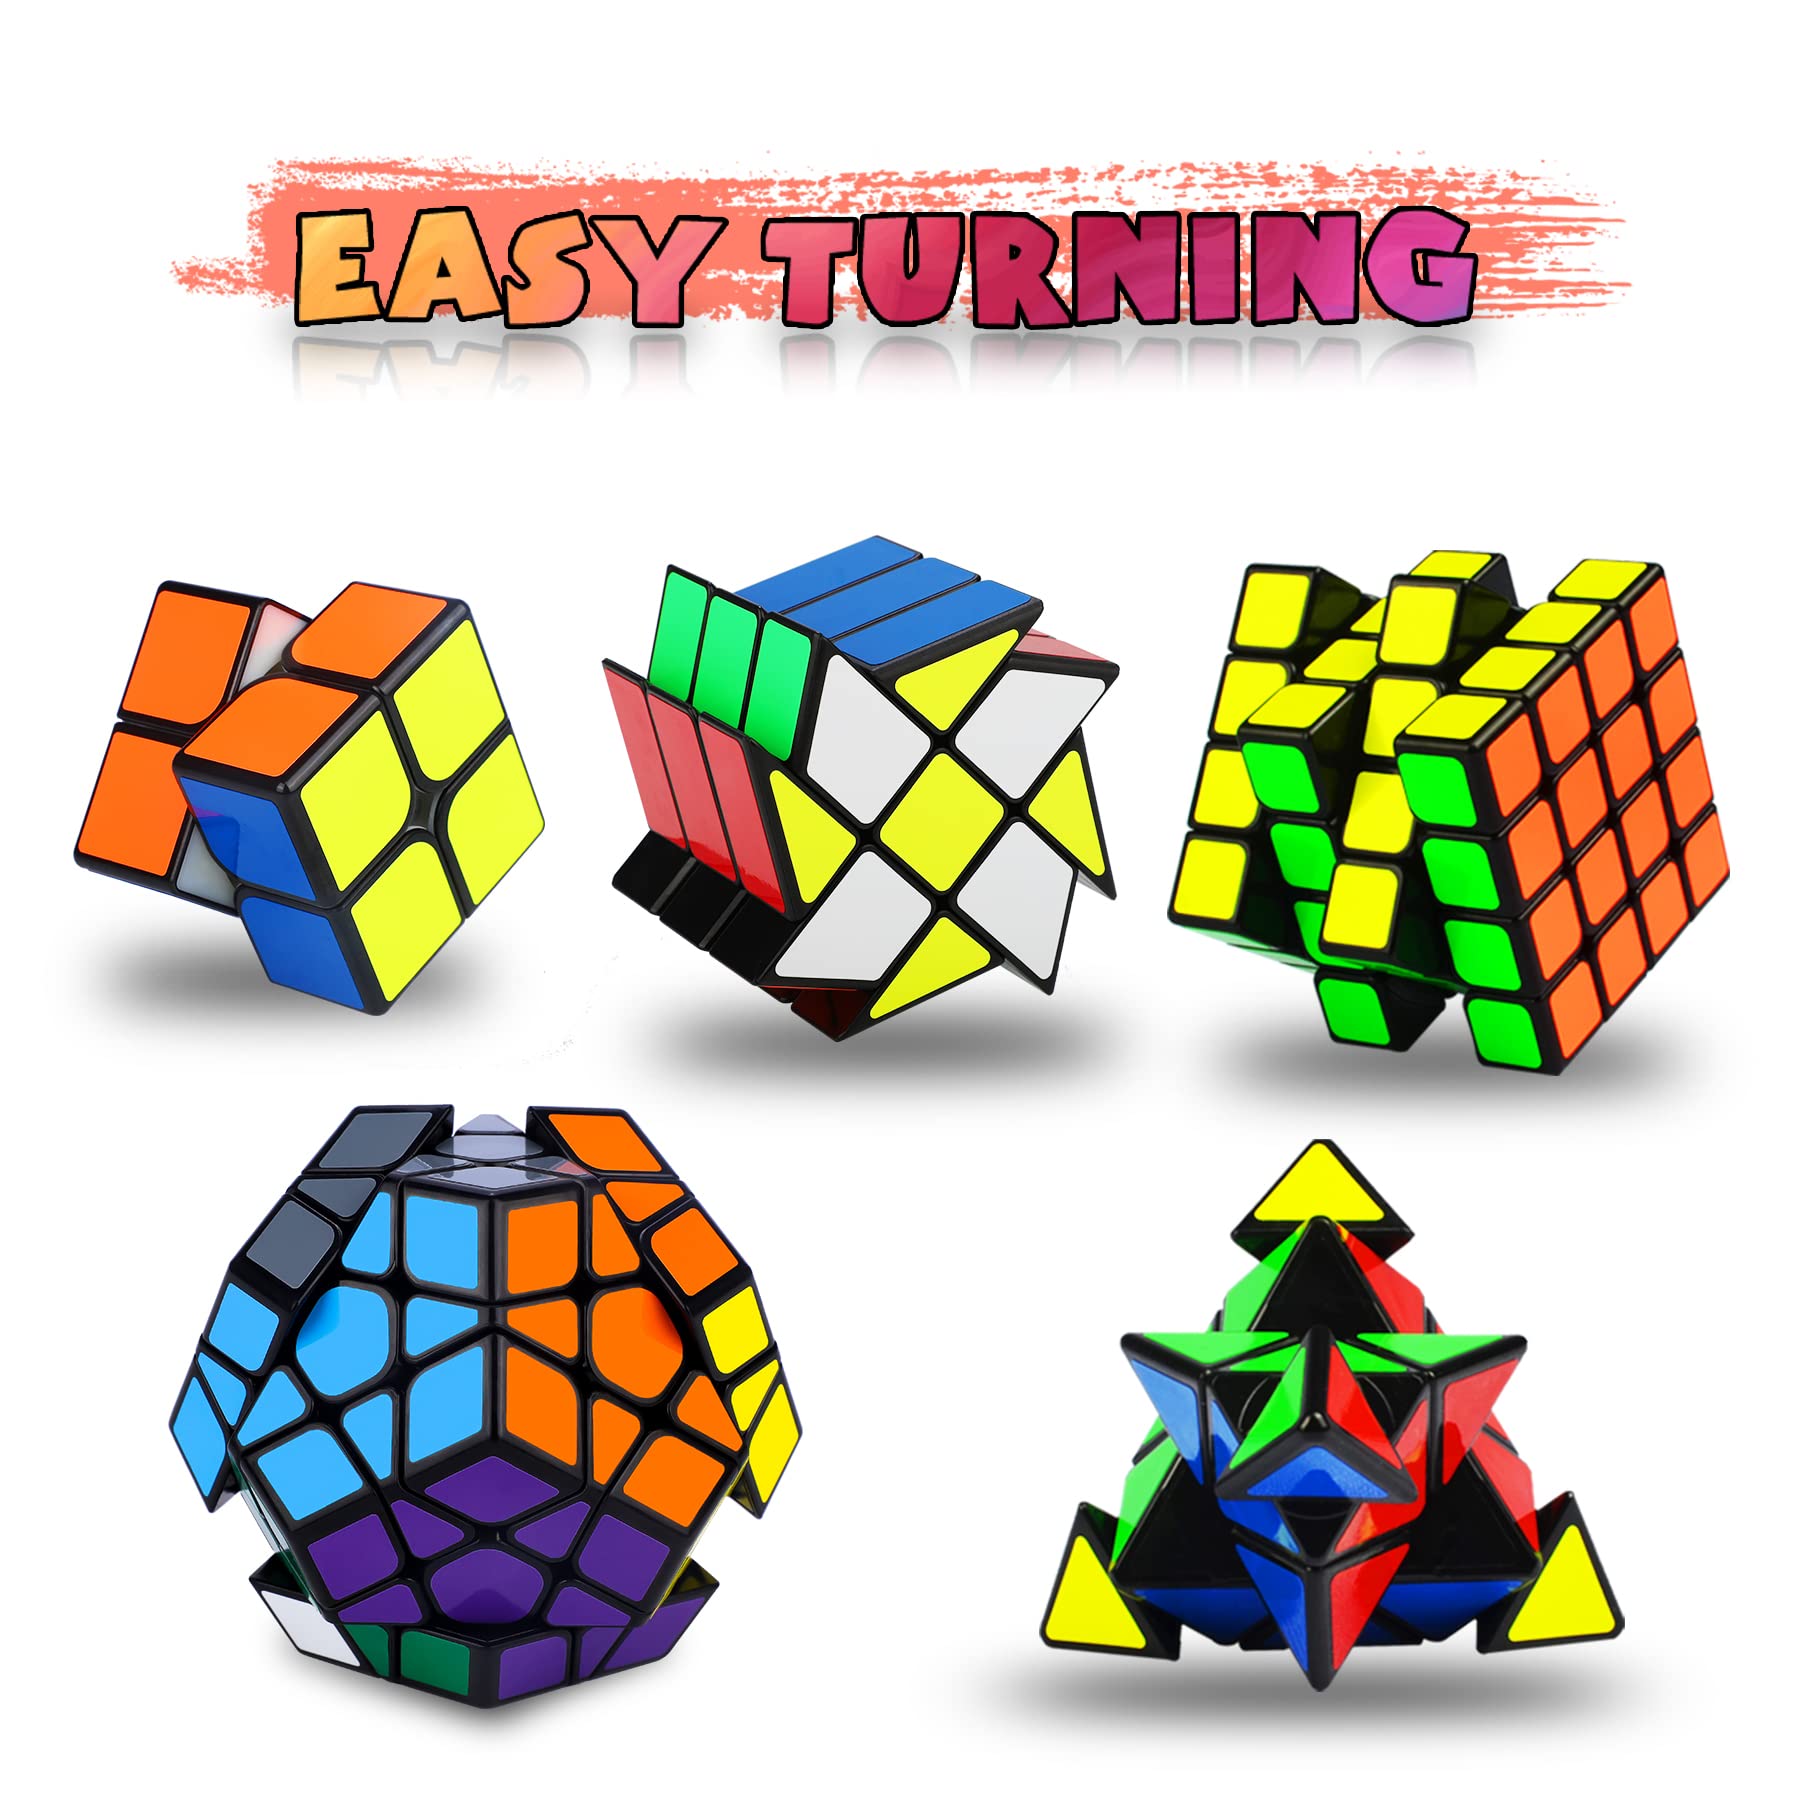 Speed Cube Set, Puzzle Cube, Magic Cube 2x2 4x4 Pyraminx Pyramid Megaminx Fenghuolun Puzzle Cube Toy Gift for Children Adults, Pack of 5 - amzGamess